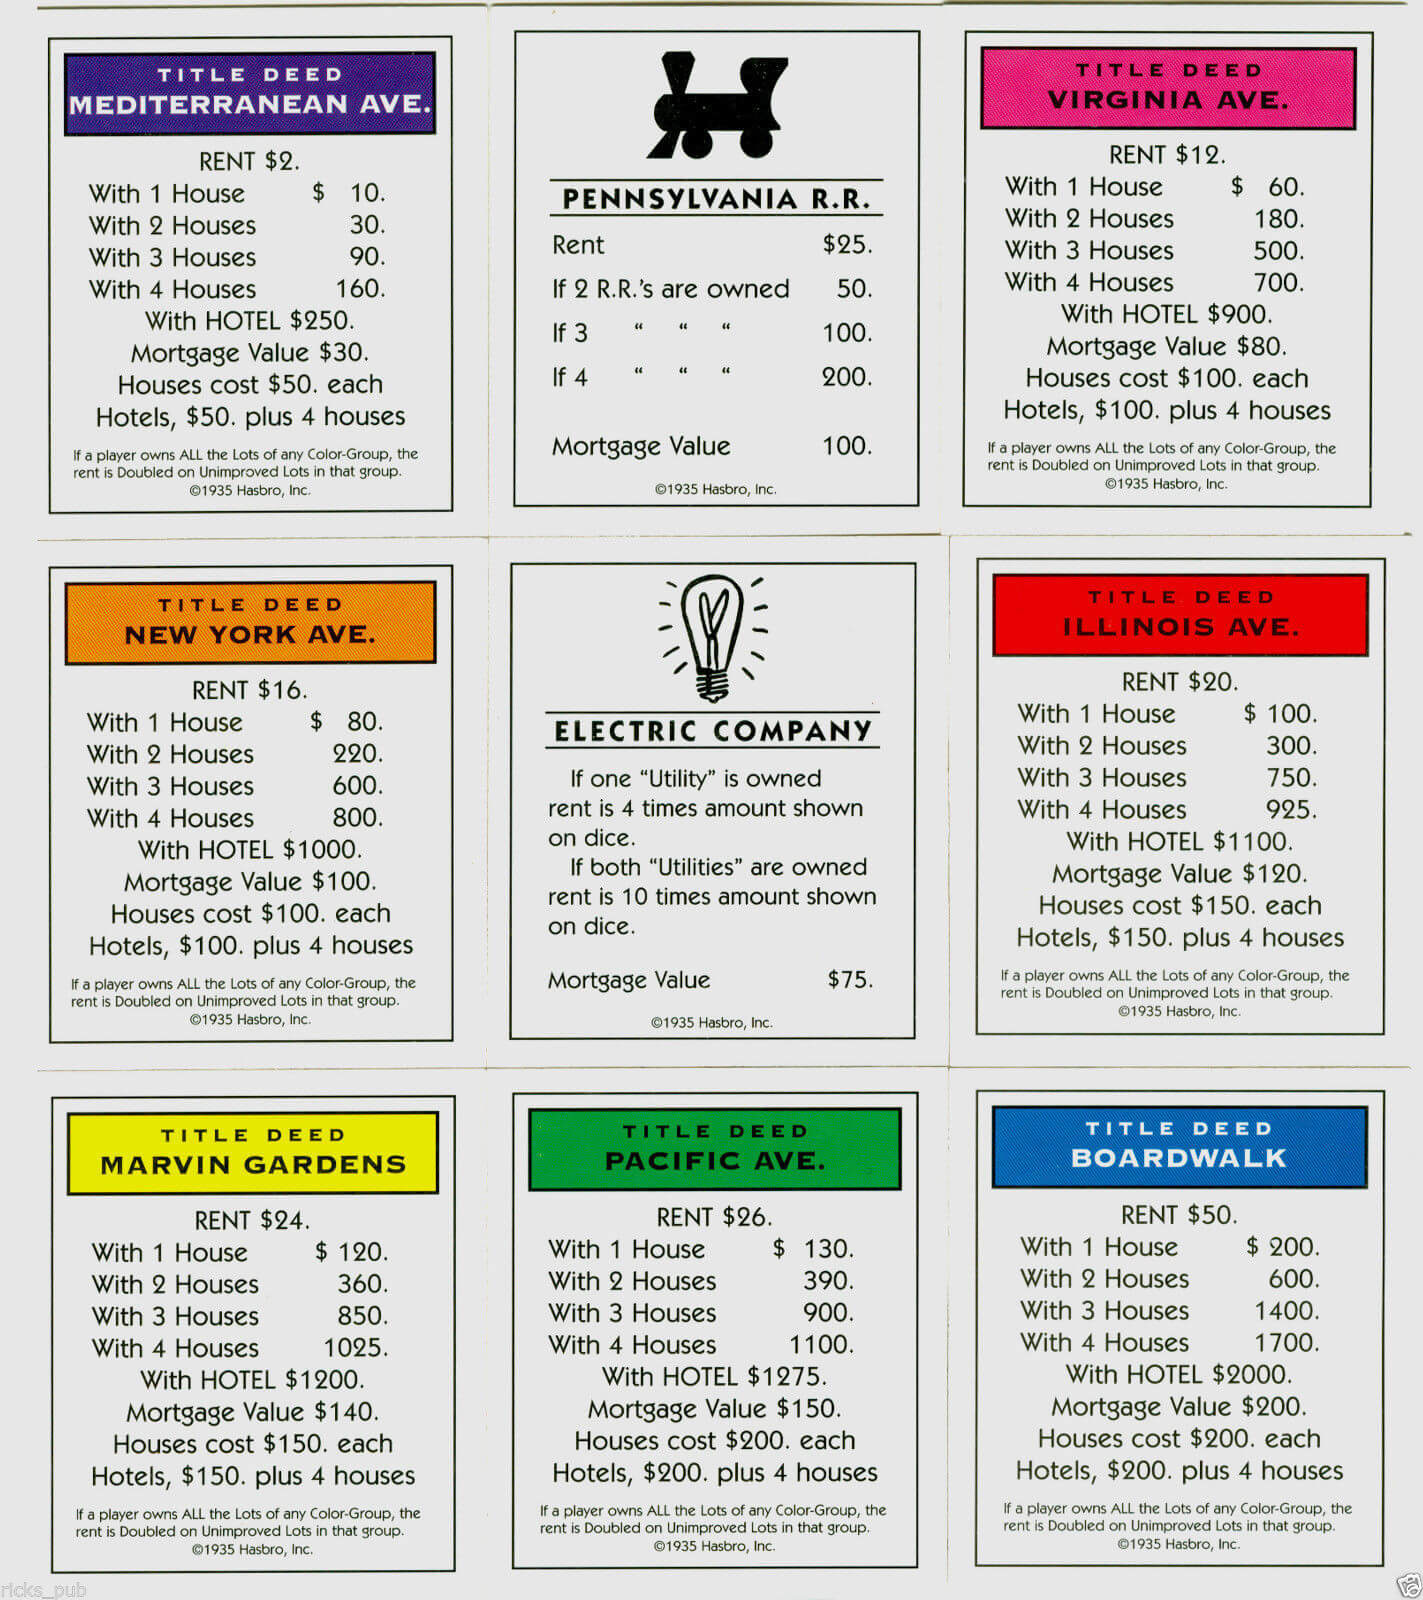 1C1 Monopoly Chance Card Template | Wiring Library Throughout Monopoly Property Cards Template